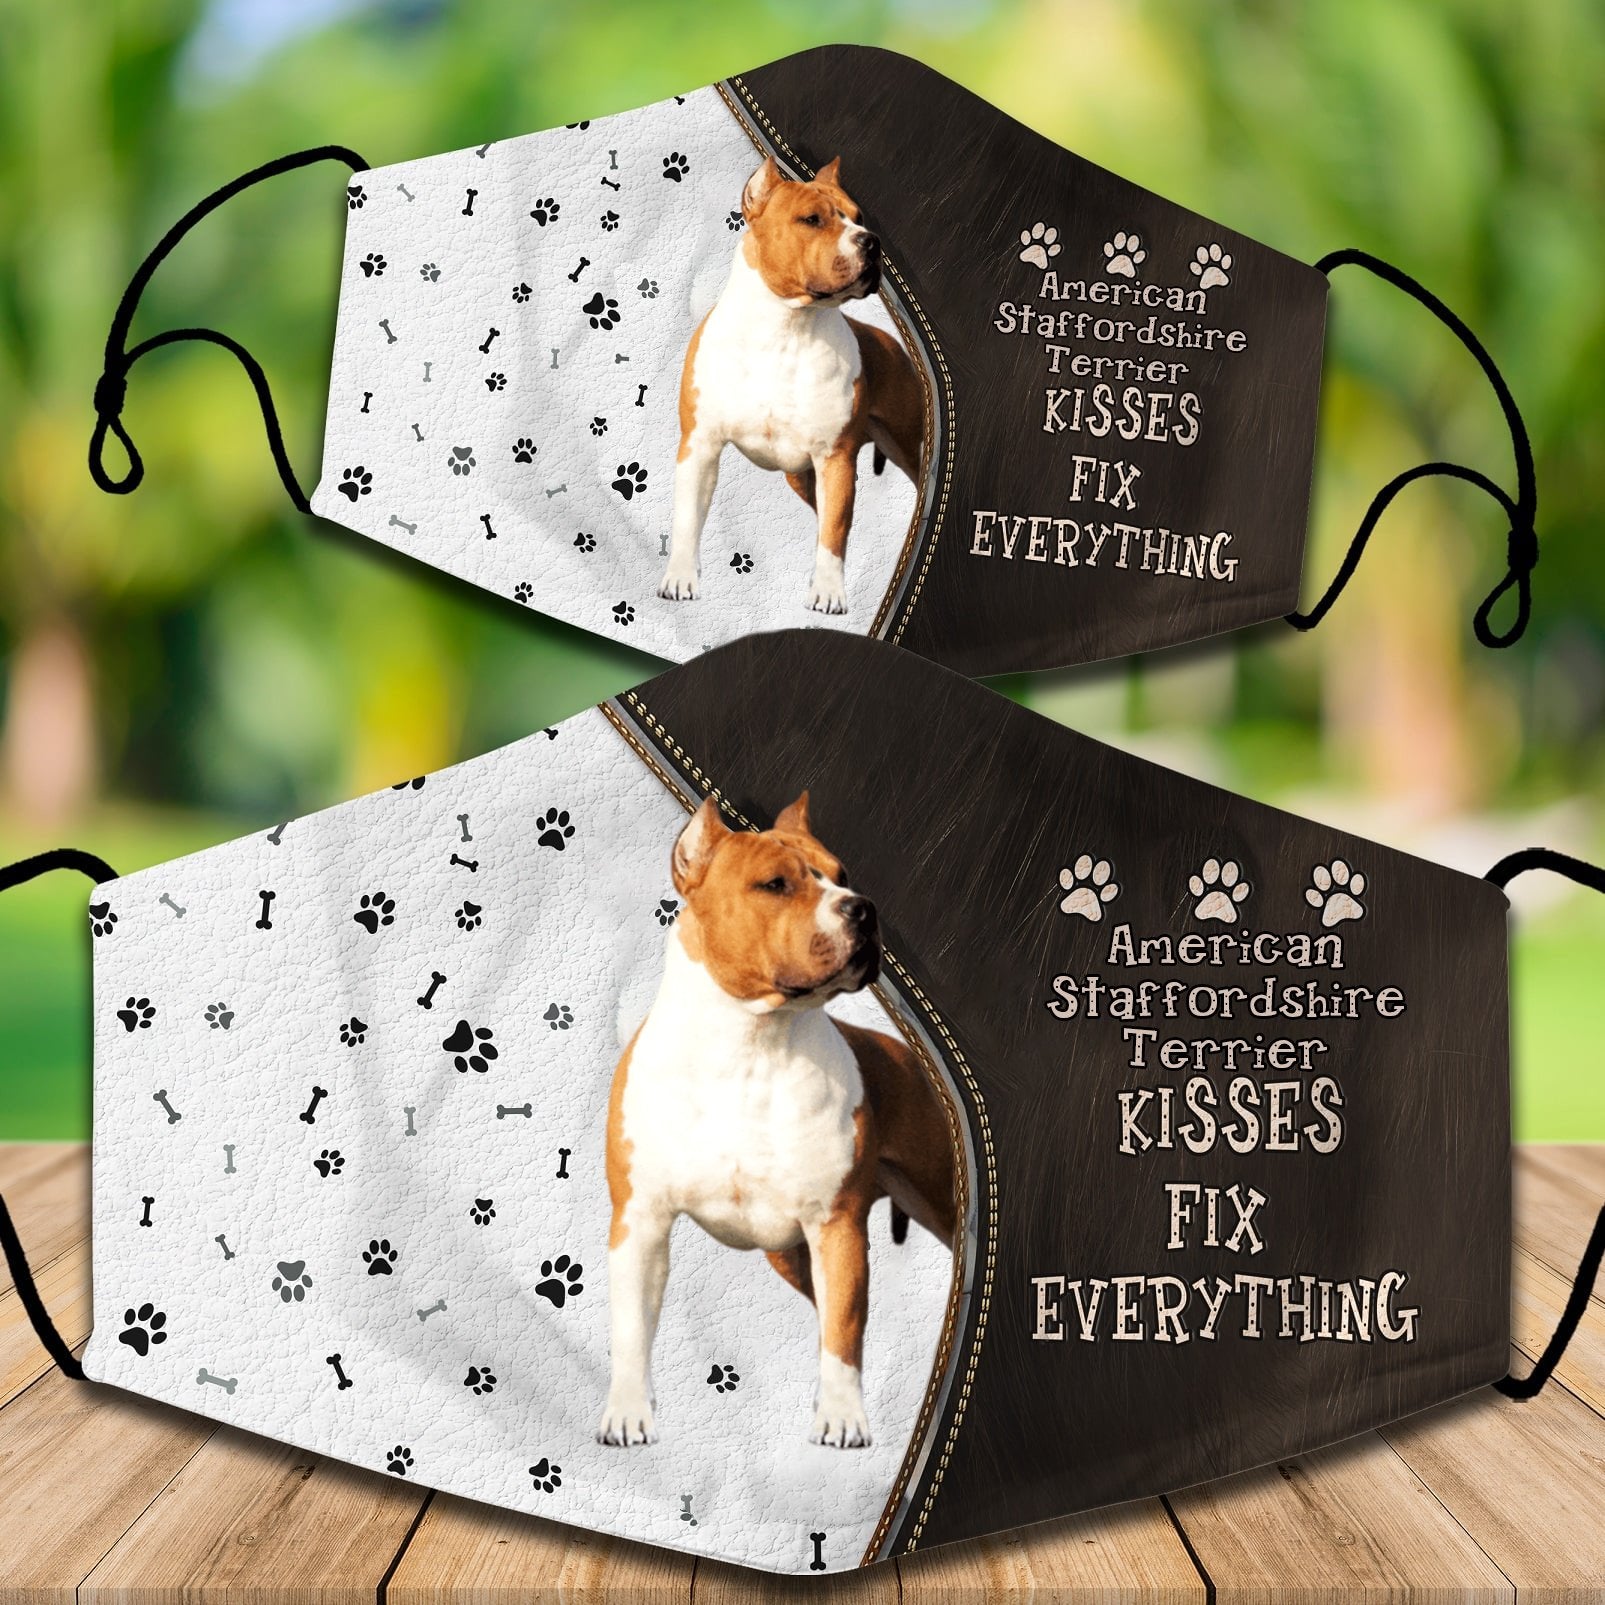 American Staffordshire Terrier Kisses Fix Everything Veil